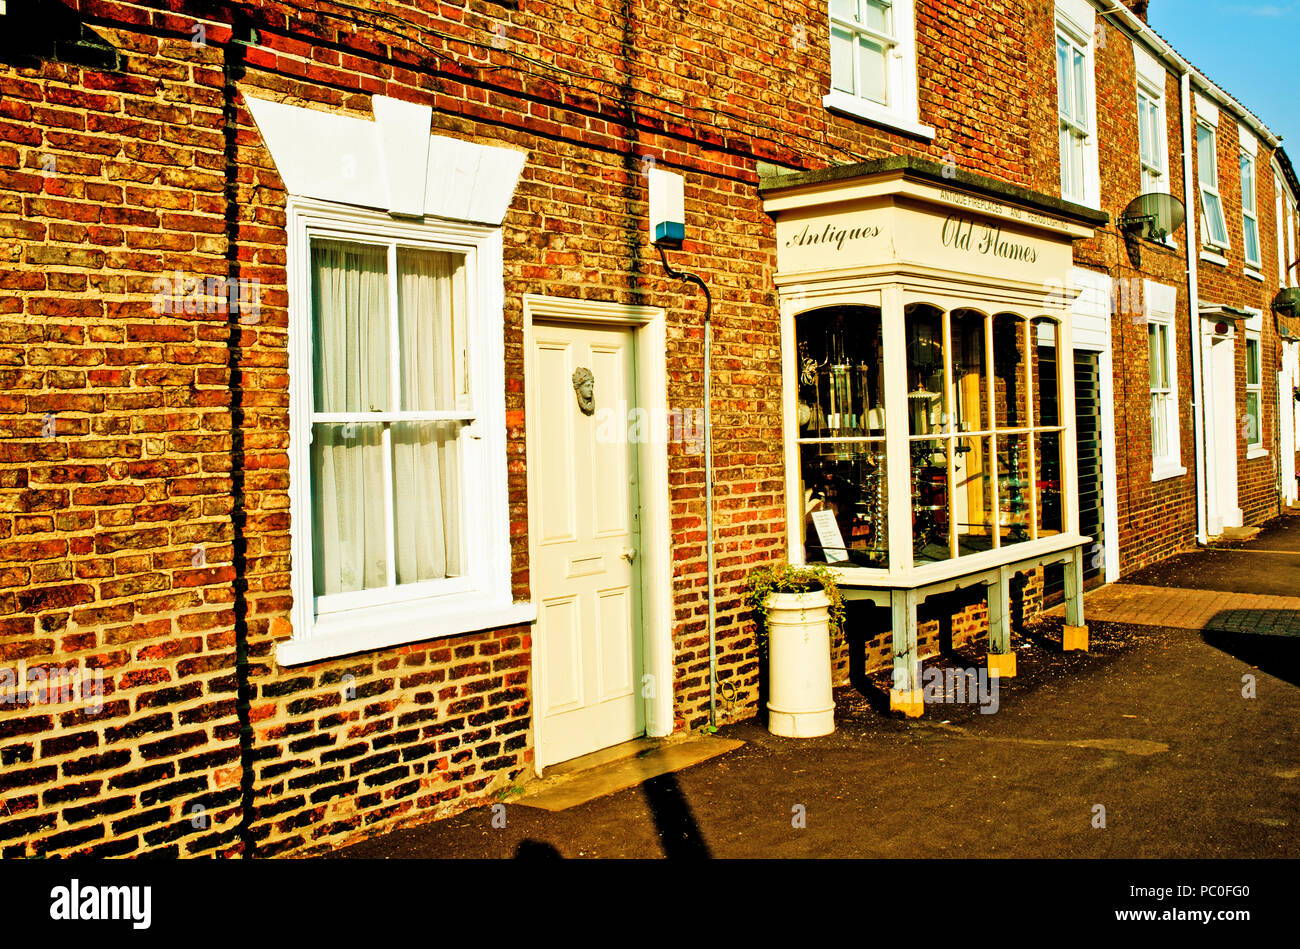 Old Flames Antique shop, Easingwold, North Yorkshire, England Stock Photo